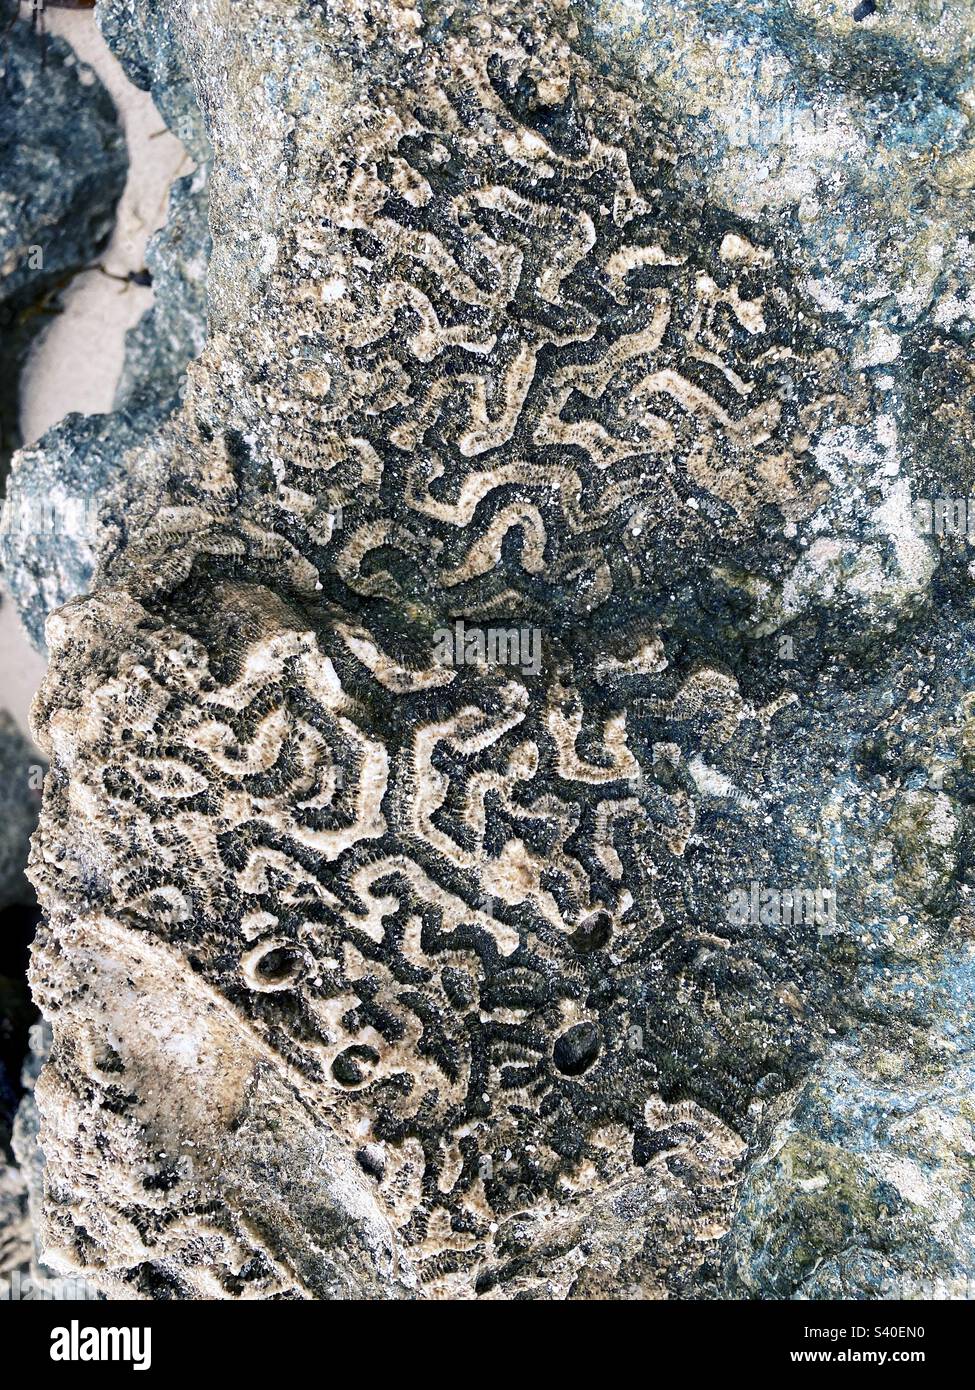 Fossilized coral at Bahia Honda state park in the Florida keys. Stock Photo